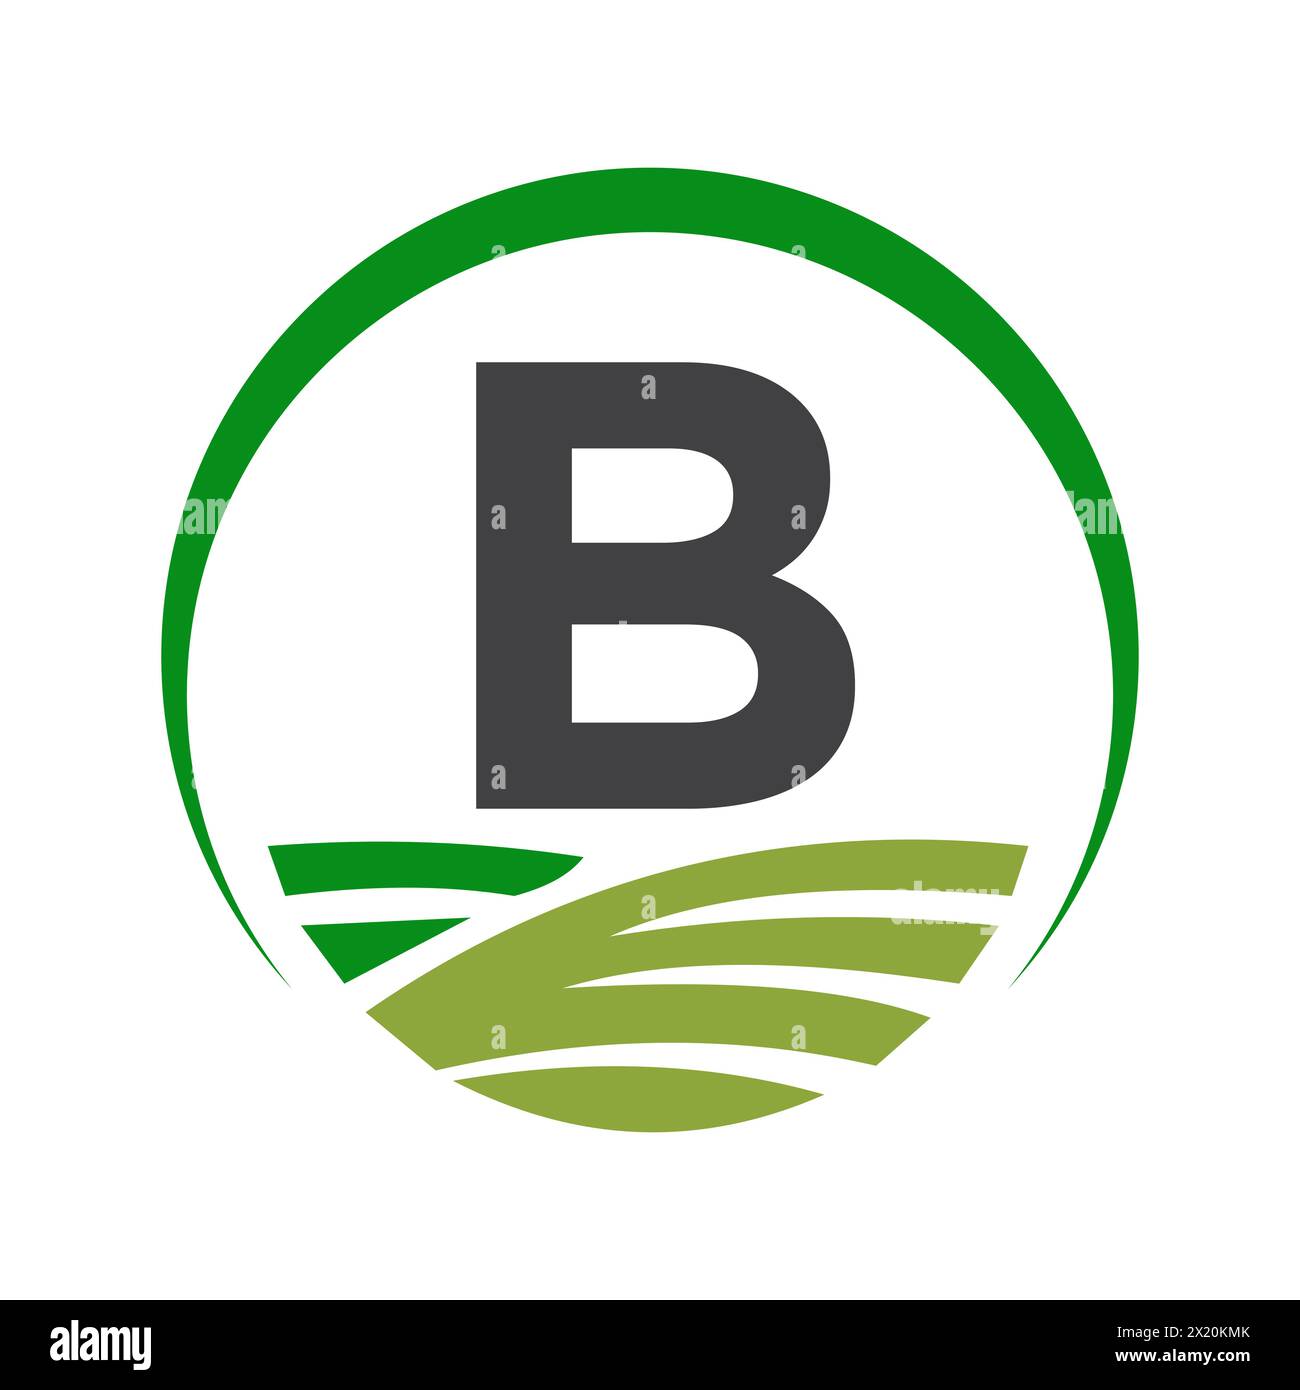 Agriculture Logo On Letter B Concept For Farming Symbol Stock Vector